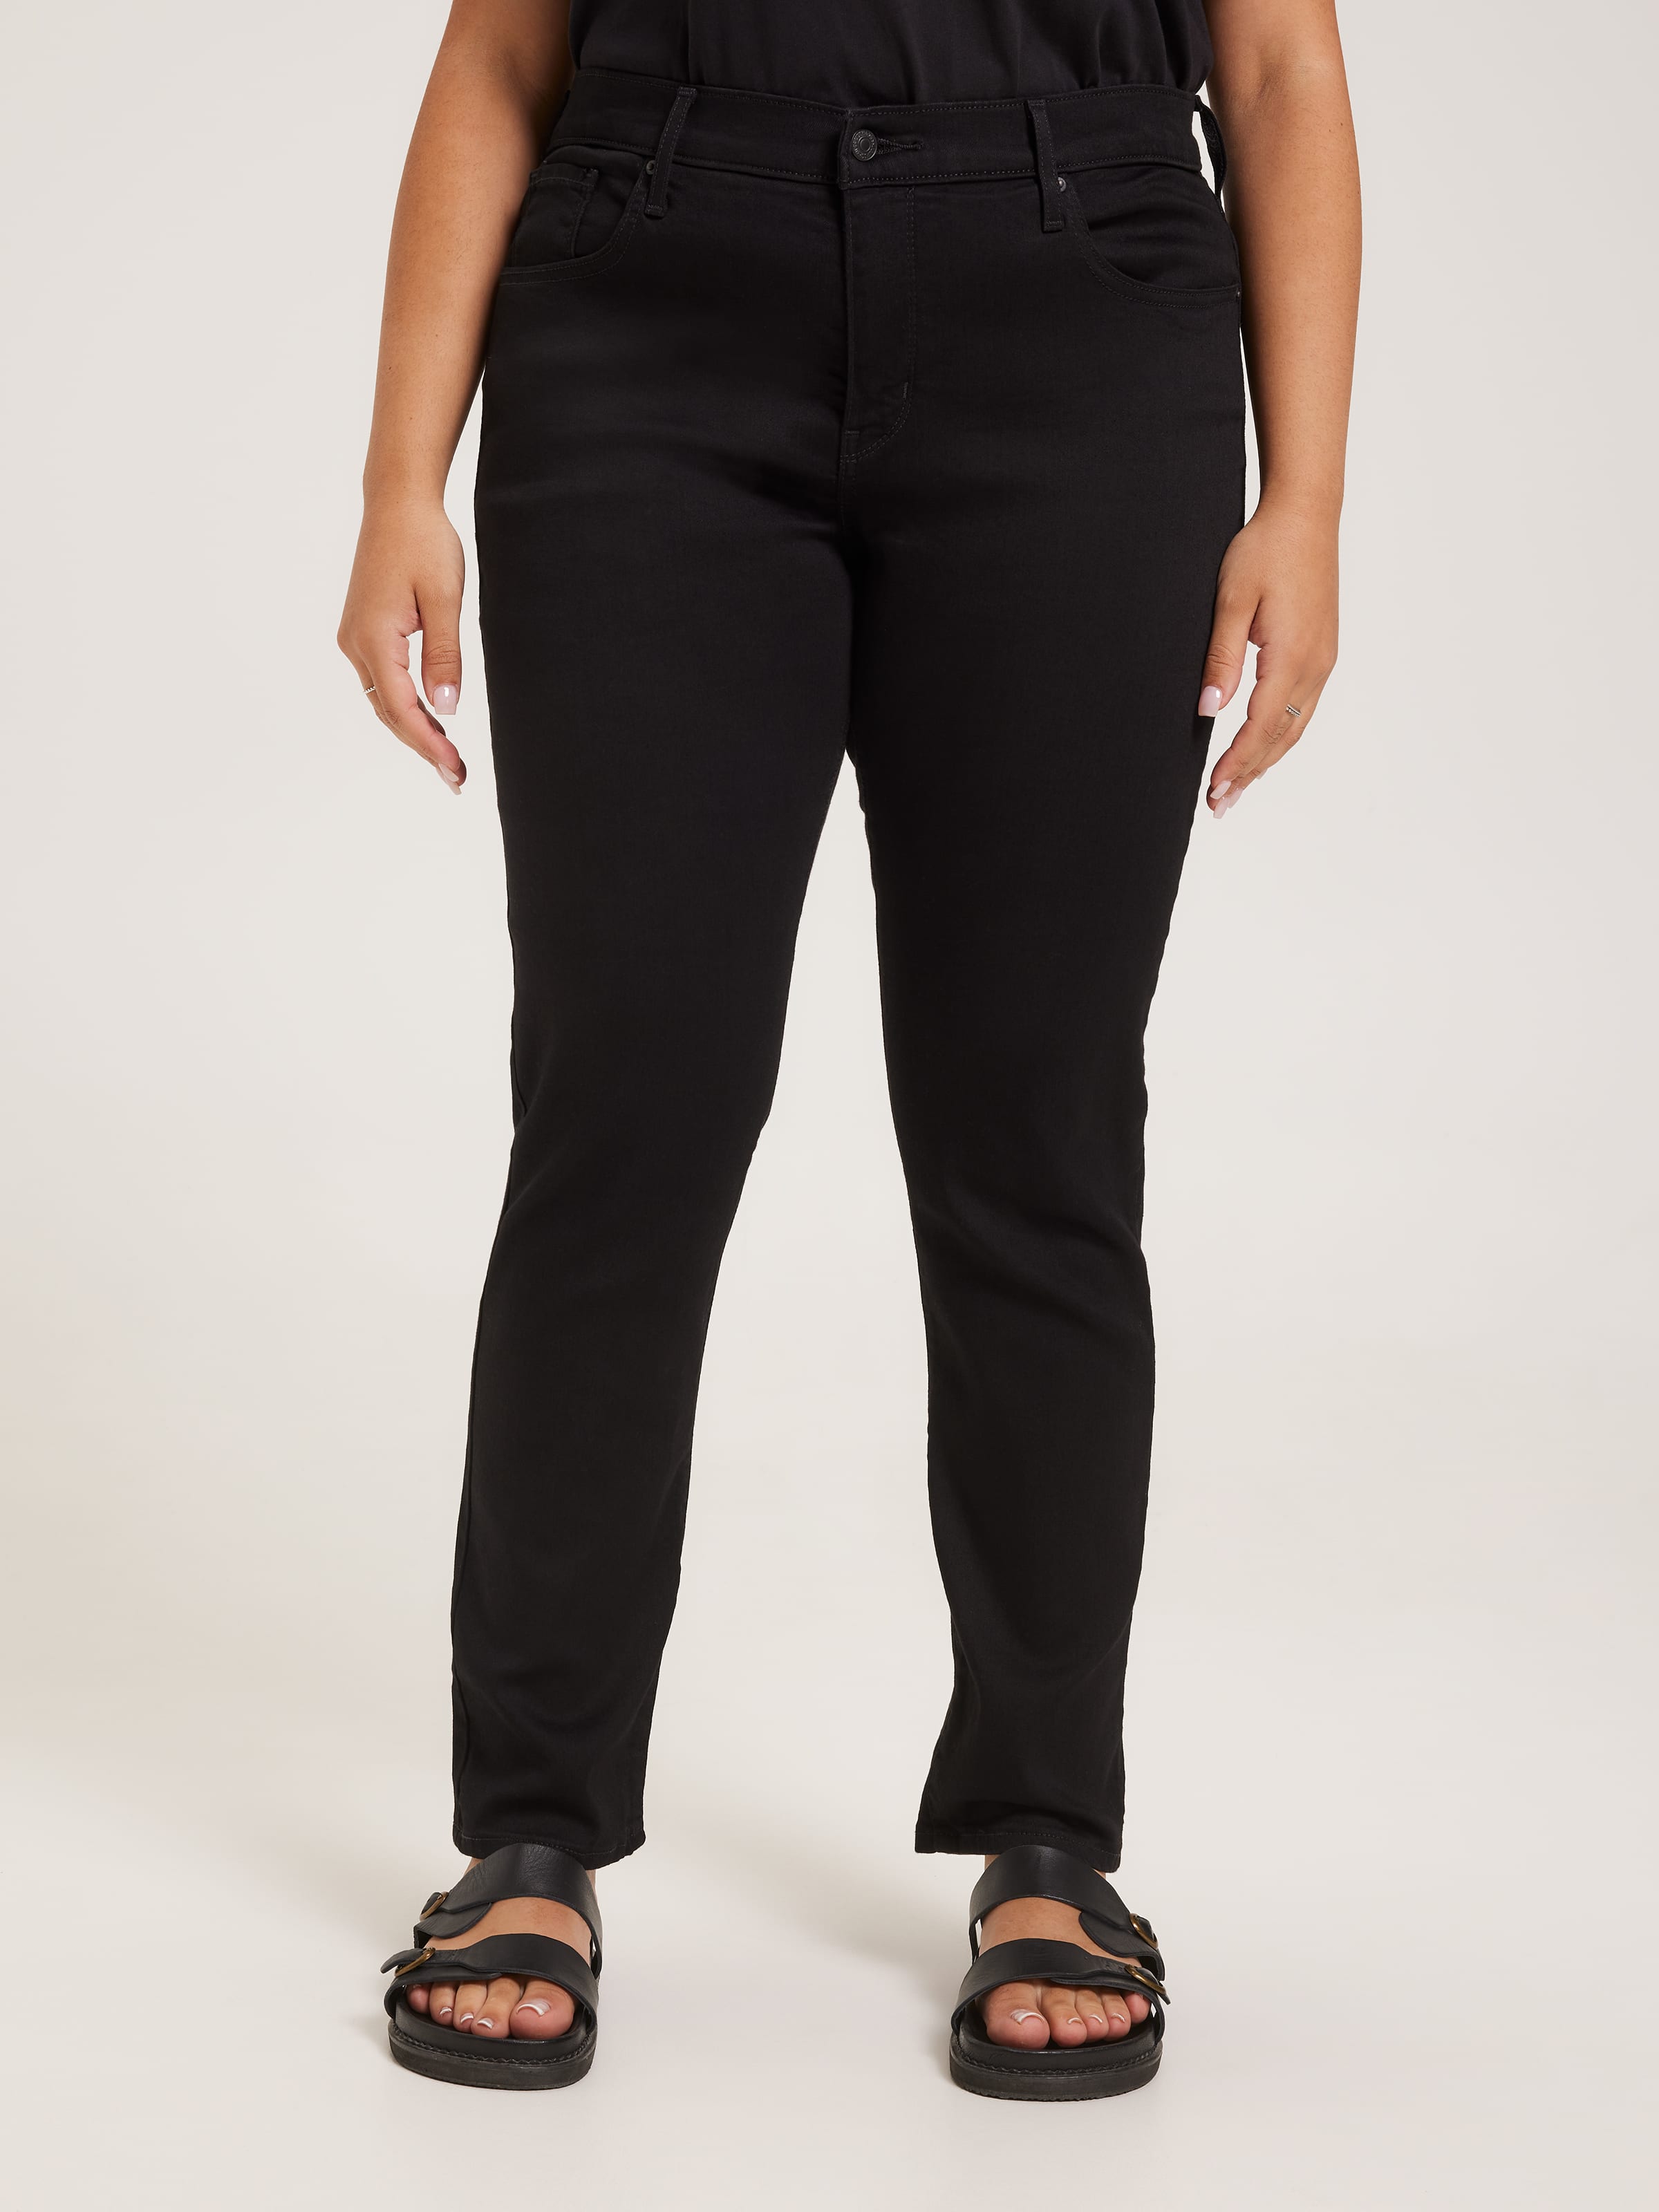 Plus 311 Shaping Skinny Jean In Soft Black - Just Jeans Online